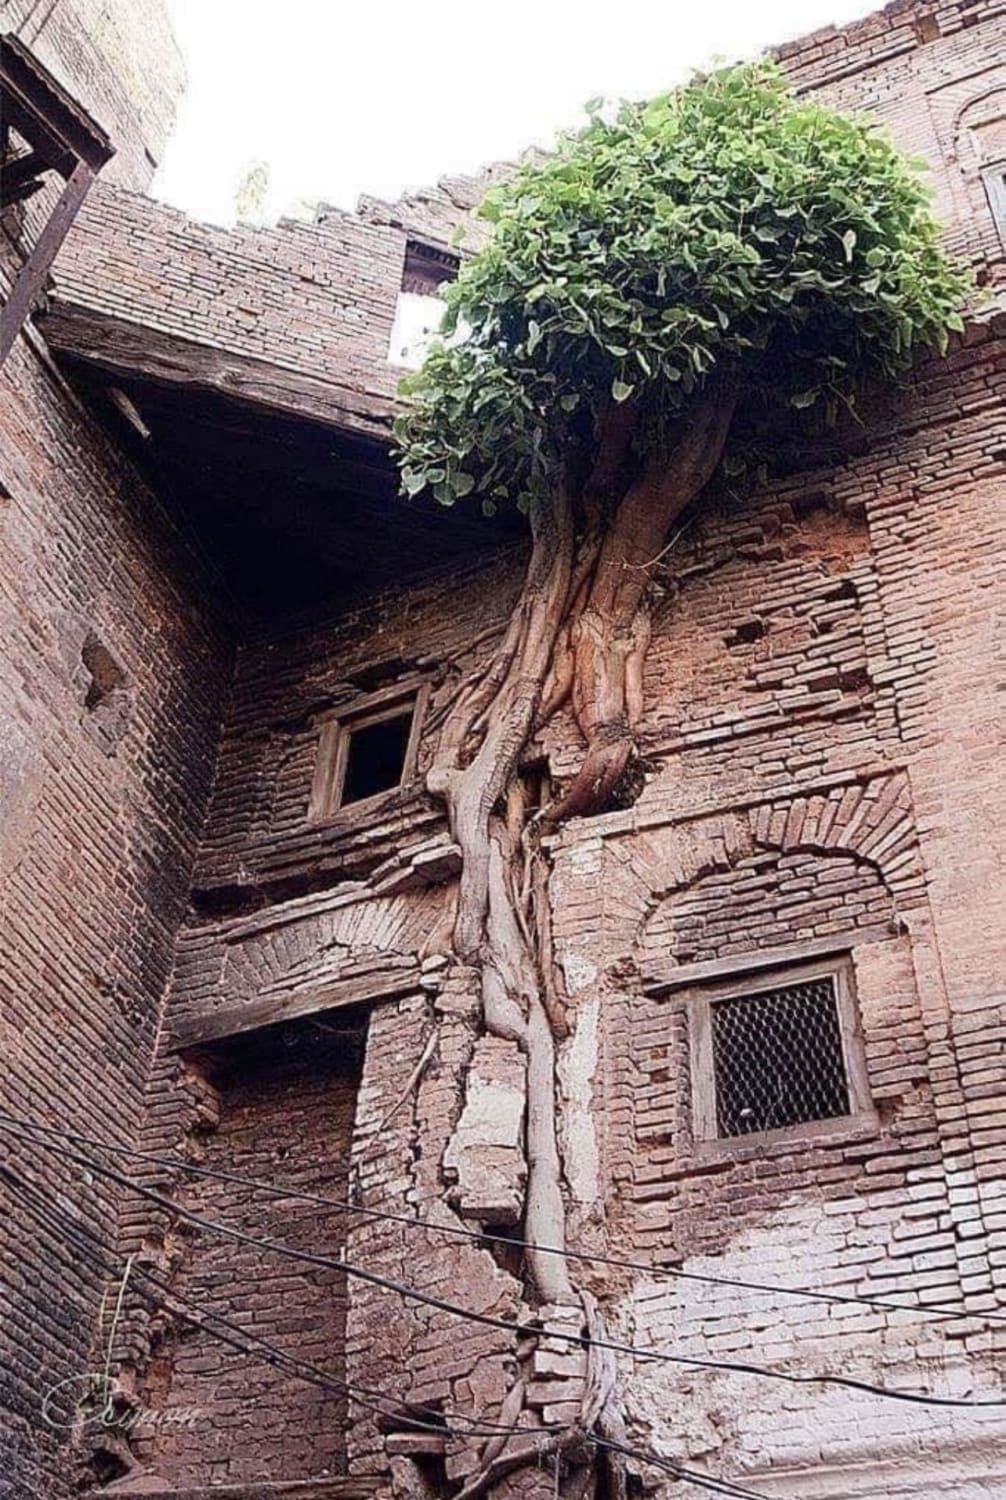 Tree growing into abandoned house.